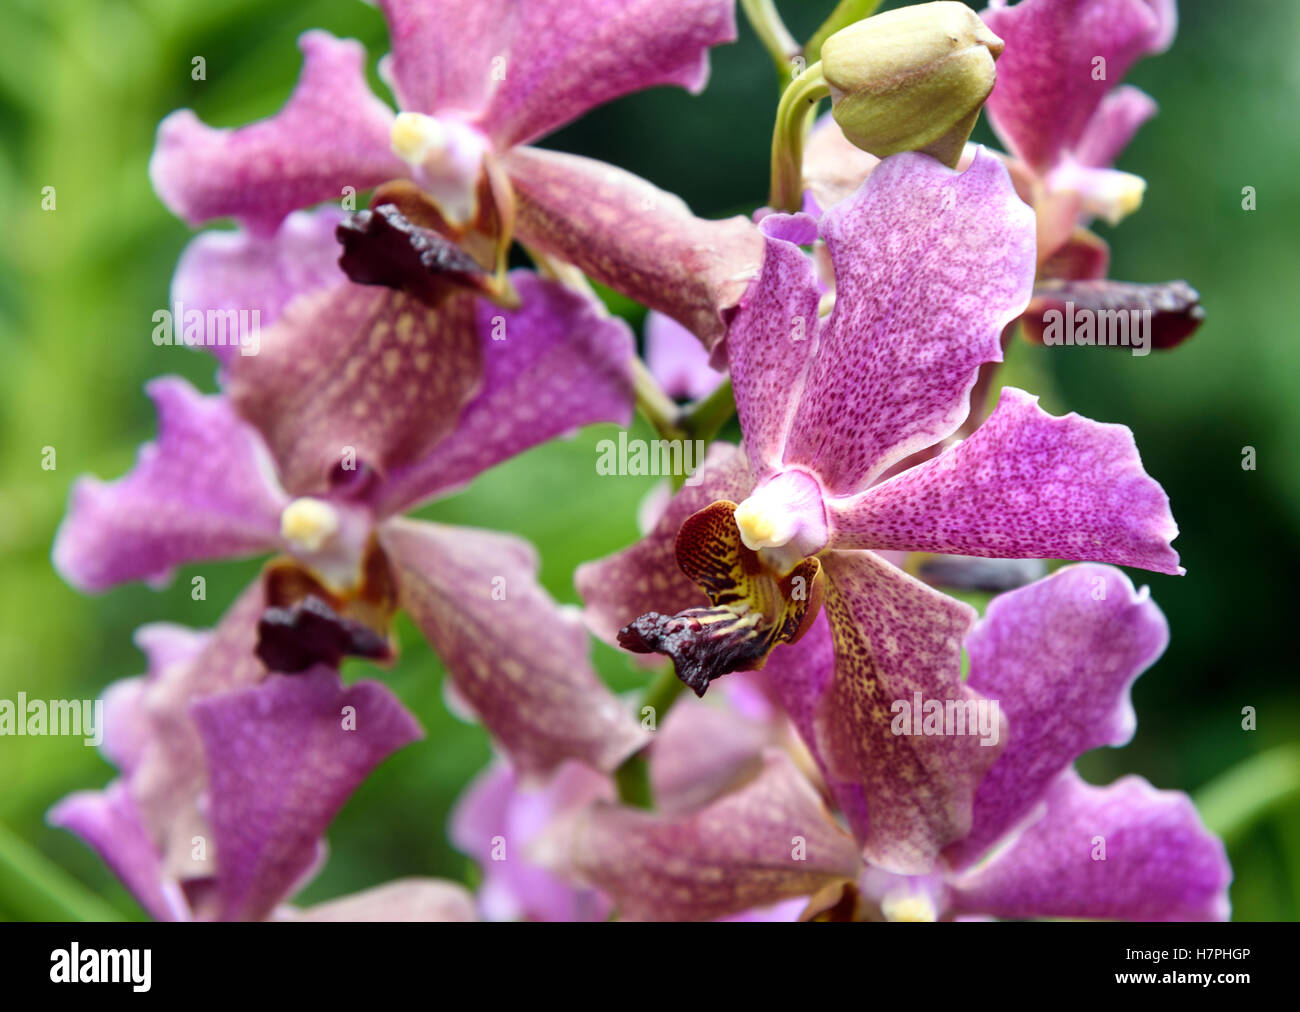 Pink orchids flower in the garden on green background Stock Photo